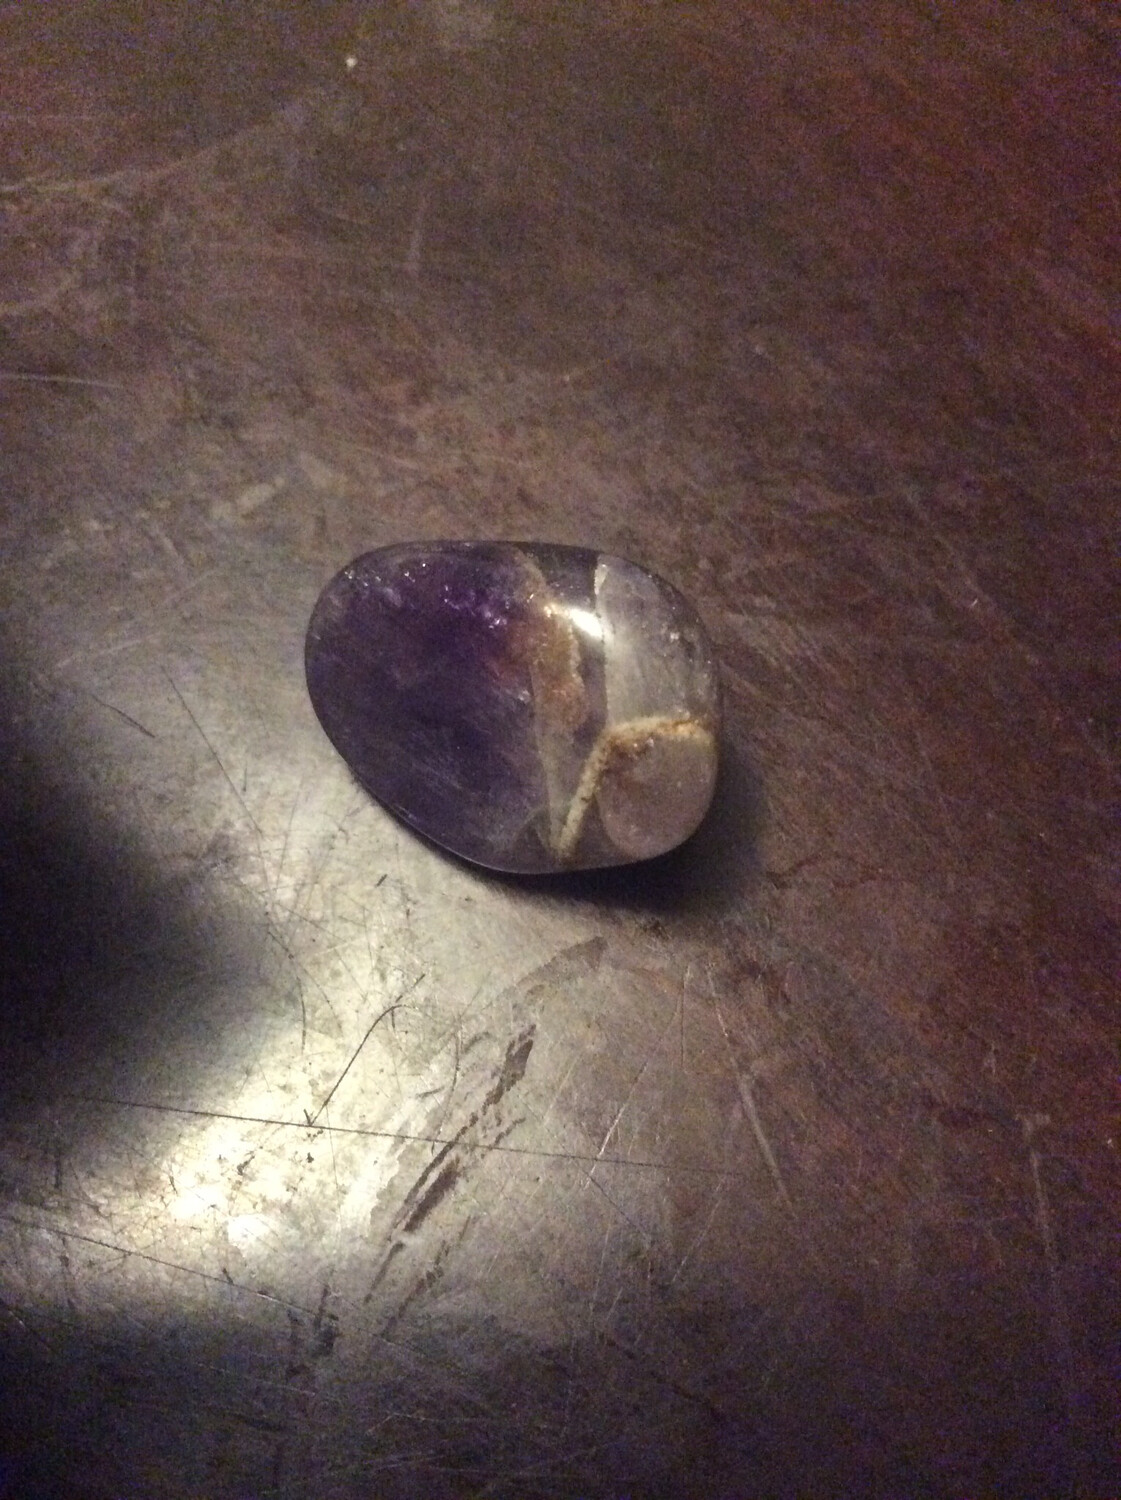 Small Amethyst And Clear Quartz Crystal Polished Stone Pure Powerful Etheric And Esoteric Energy Source